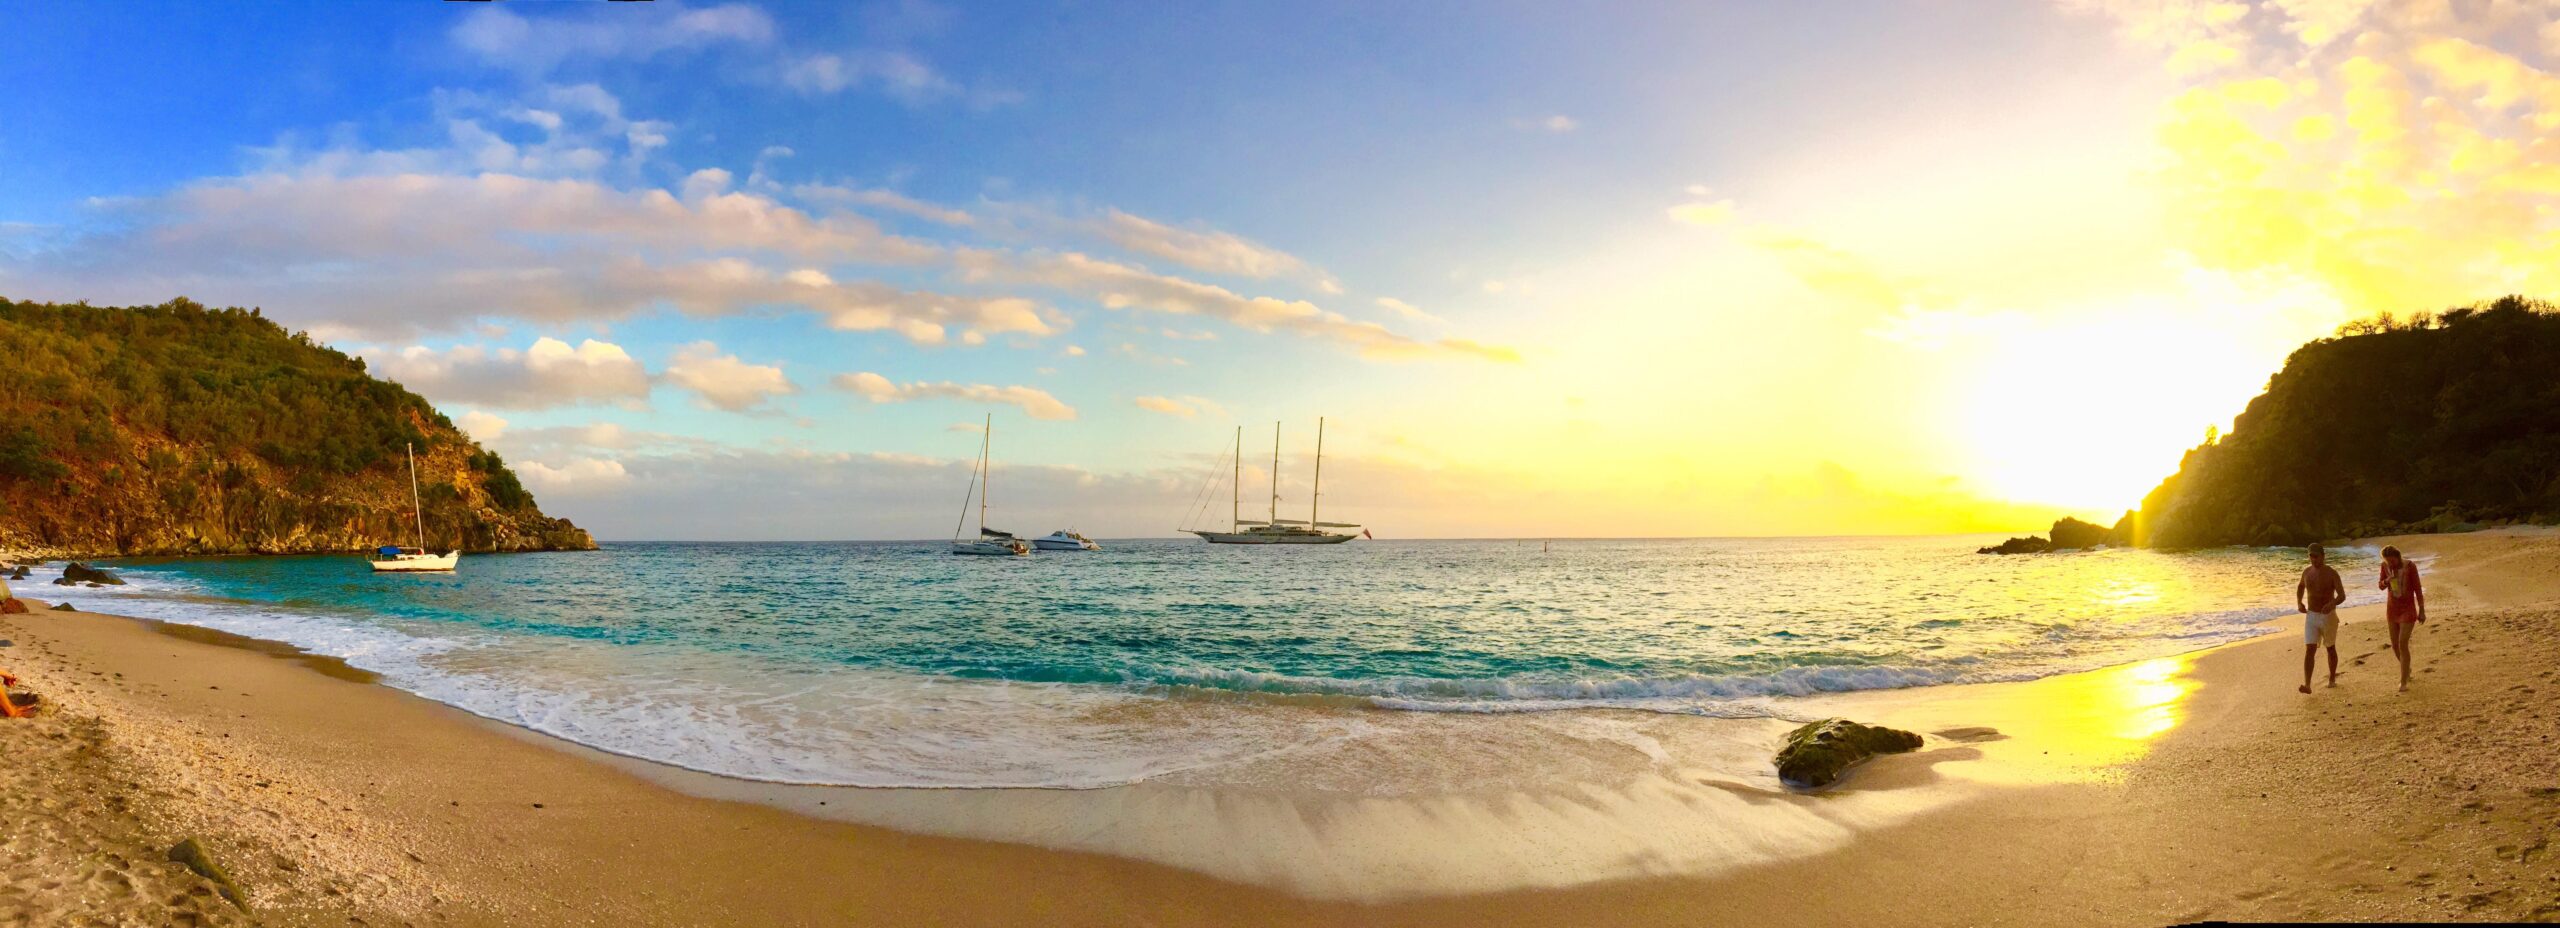 The 9 Best Things To Do In Gustavia, St. Barth Travel Blog What to Do in Gustavia SVADORE travel blog photography sunset shell beach Best Sunset In St. Barth From Shell Beach & Fort Karl